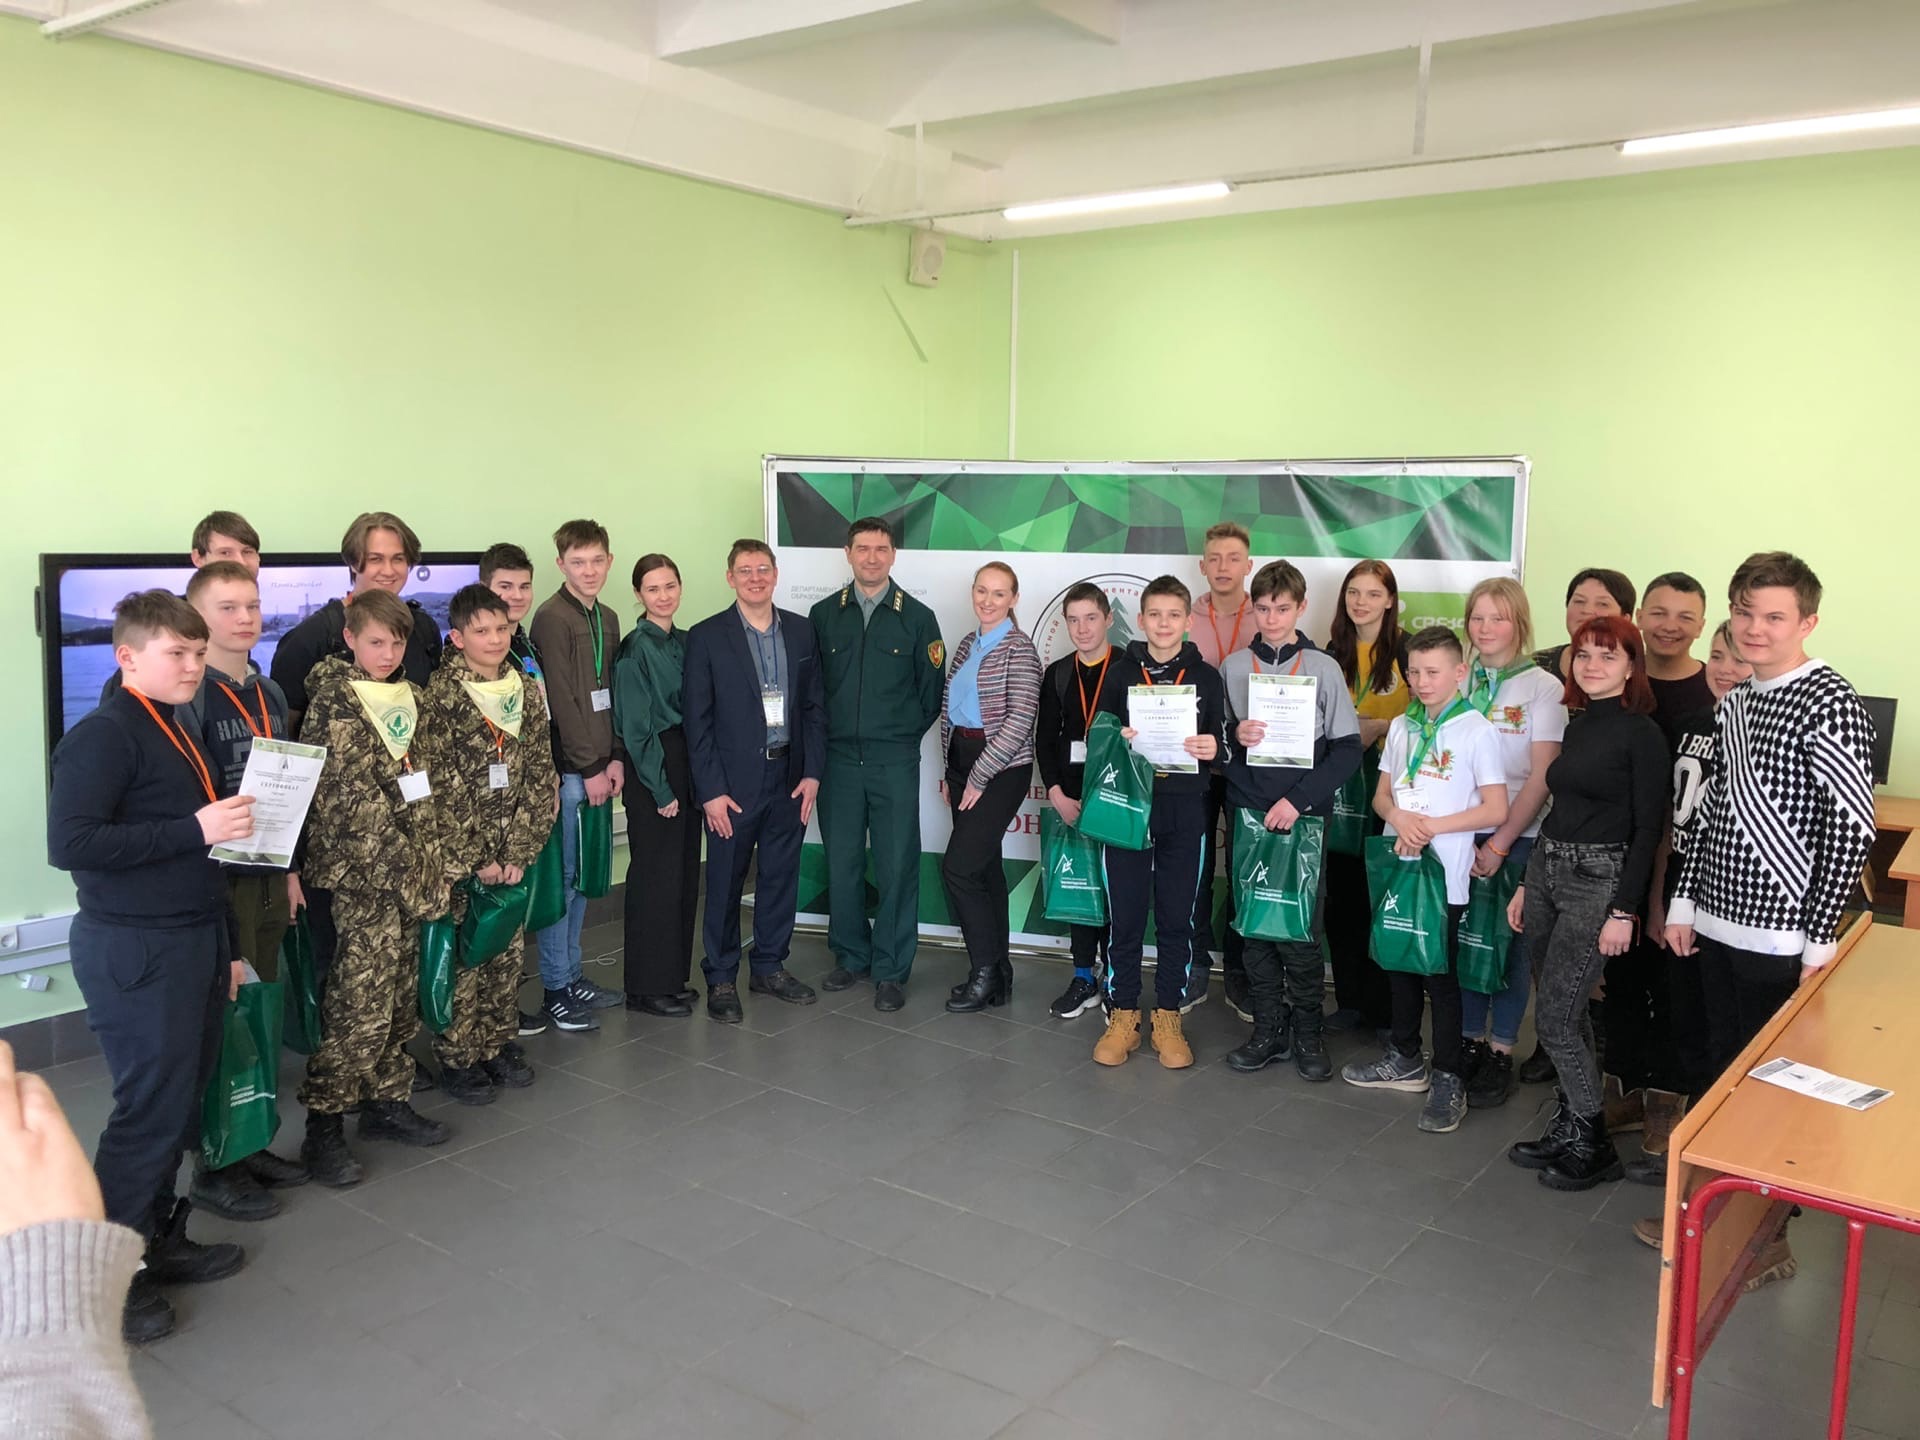 March 1 at the Cherepovets Forestry Technical School named after V.P. Chkalov the regional career guidance contest among students “Young Arborist” was held.